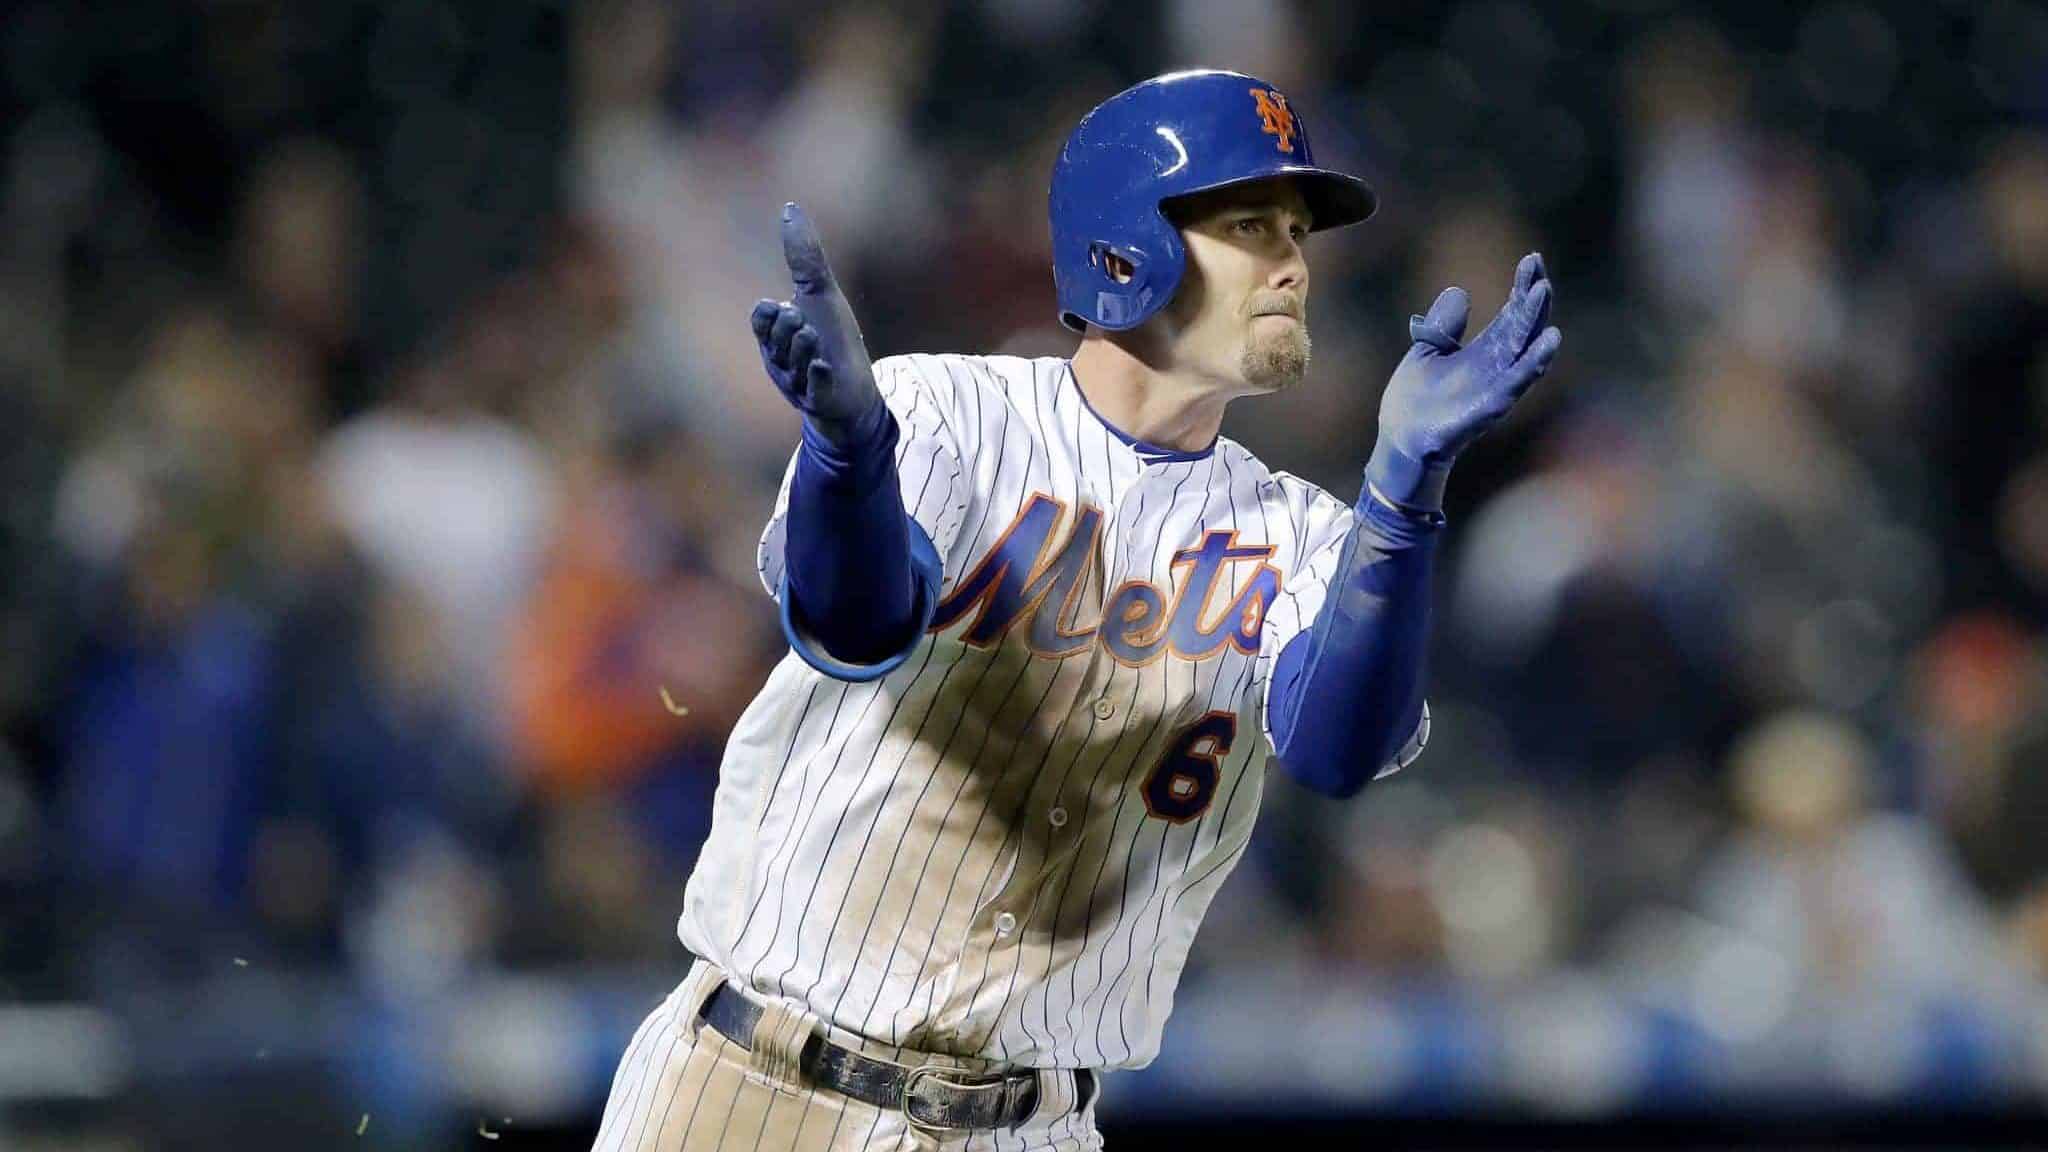 NEW YORK, NEW YORK - APRIL 30: Jeff McNeil #6 of the New York Mets celebrates his single in the 10th inning against the Cincinnati Reds at Citi Field on April 30, 2019 in Flushing neighborhood of the Queens borough of New York City.The New York Mets defeated the Cincinnati Reds 4-3 in 10 innings.